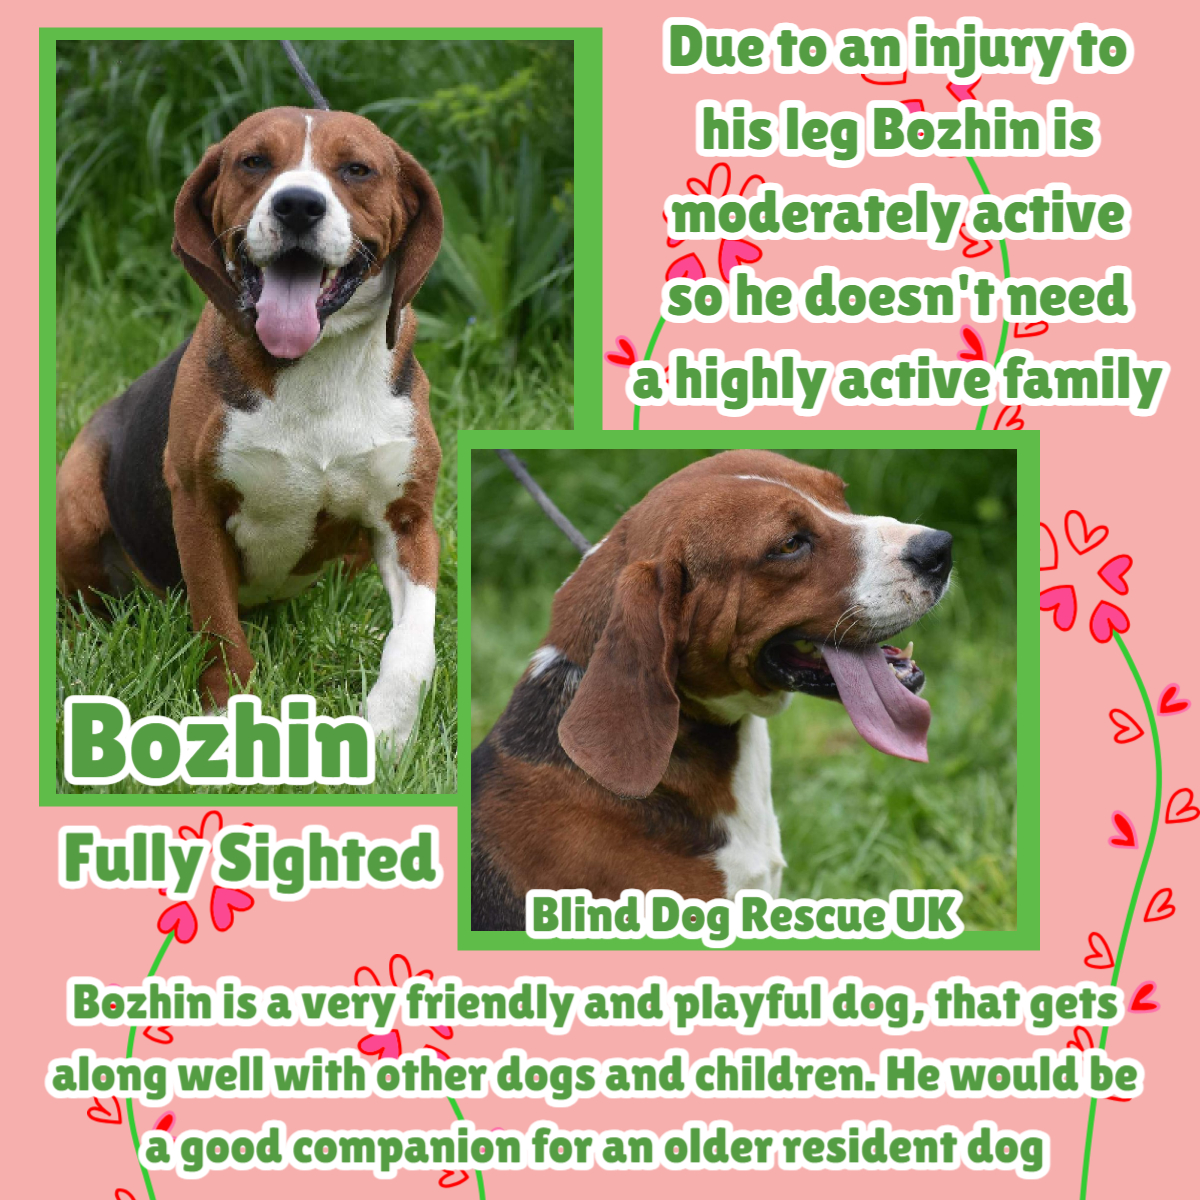 #k9hour This lad is an absolute smasher. 😍 Born in 2020, BOZHIN was found lying on the street with his front paw wrapped up. He was immediately taken to the vet, cleaned, & tested for diseases & other injuries. The x-ray didn’t show any broken bones, but it showed that he had a…